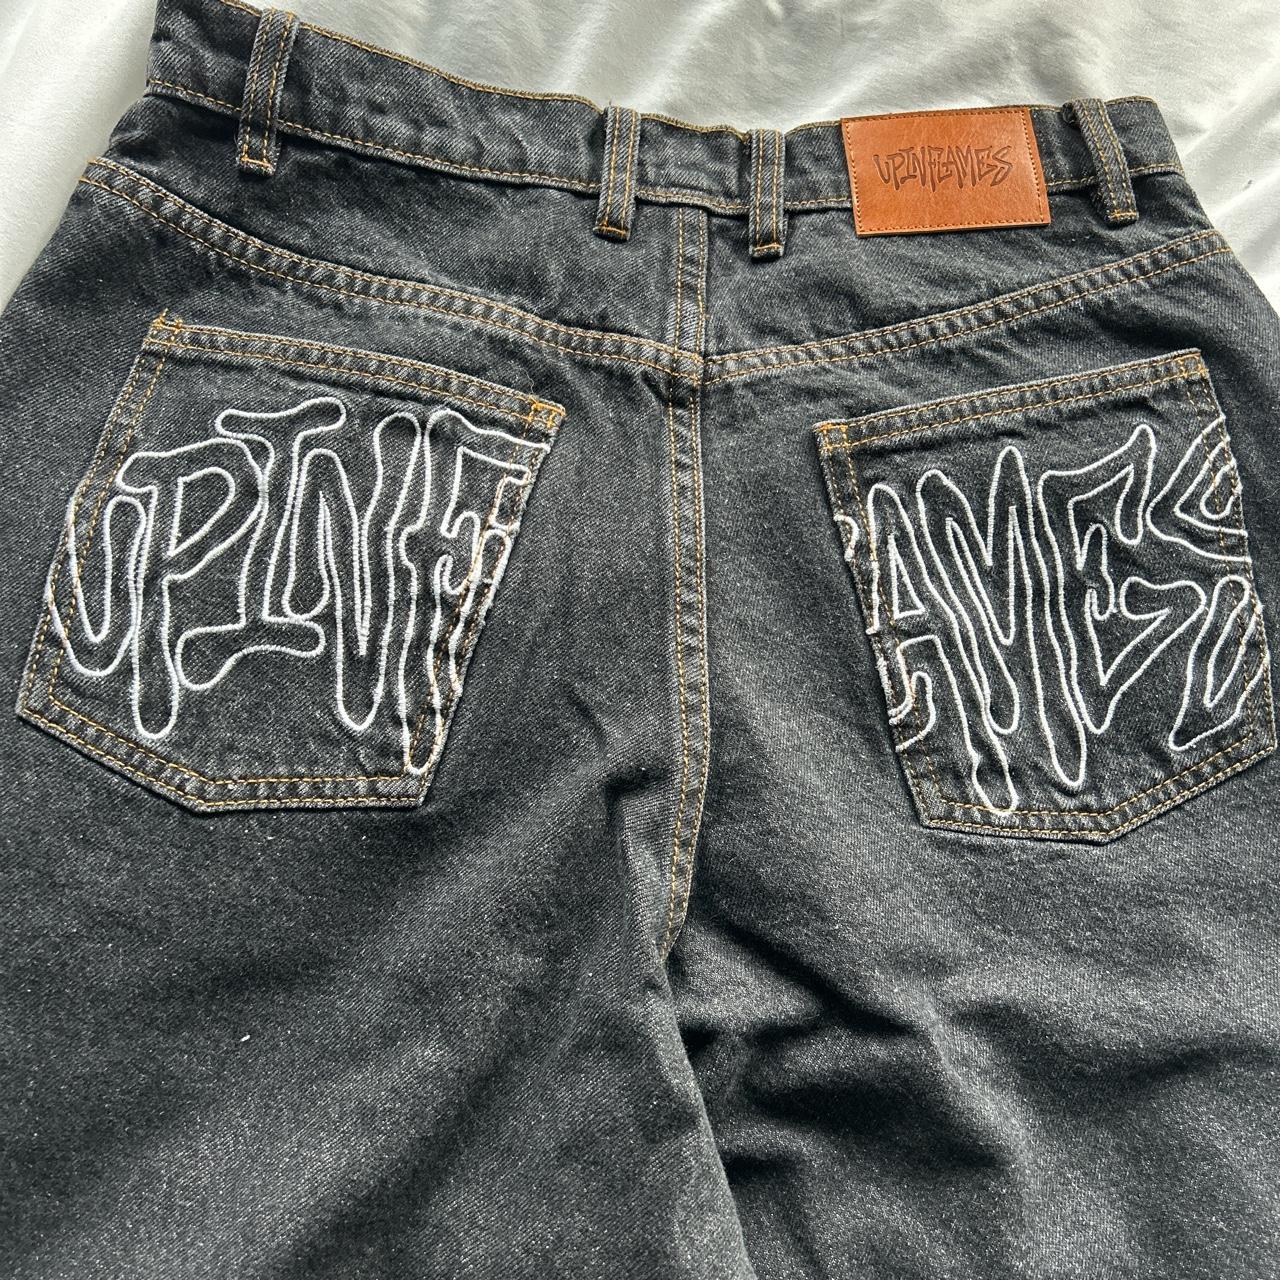 Up in flames ldn jeans Brand new with bag Only... - Depop